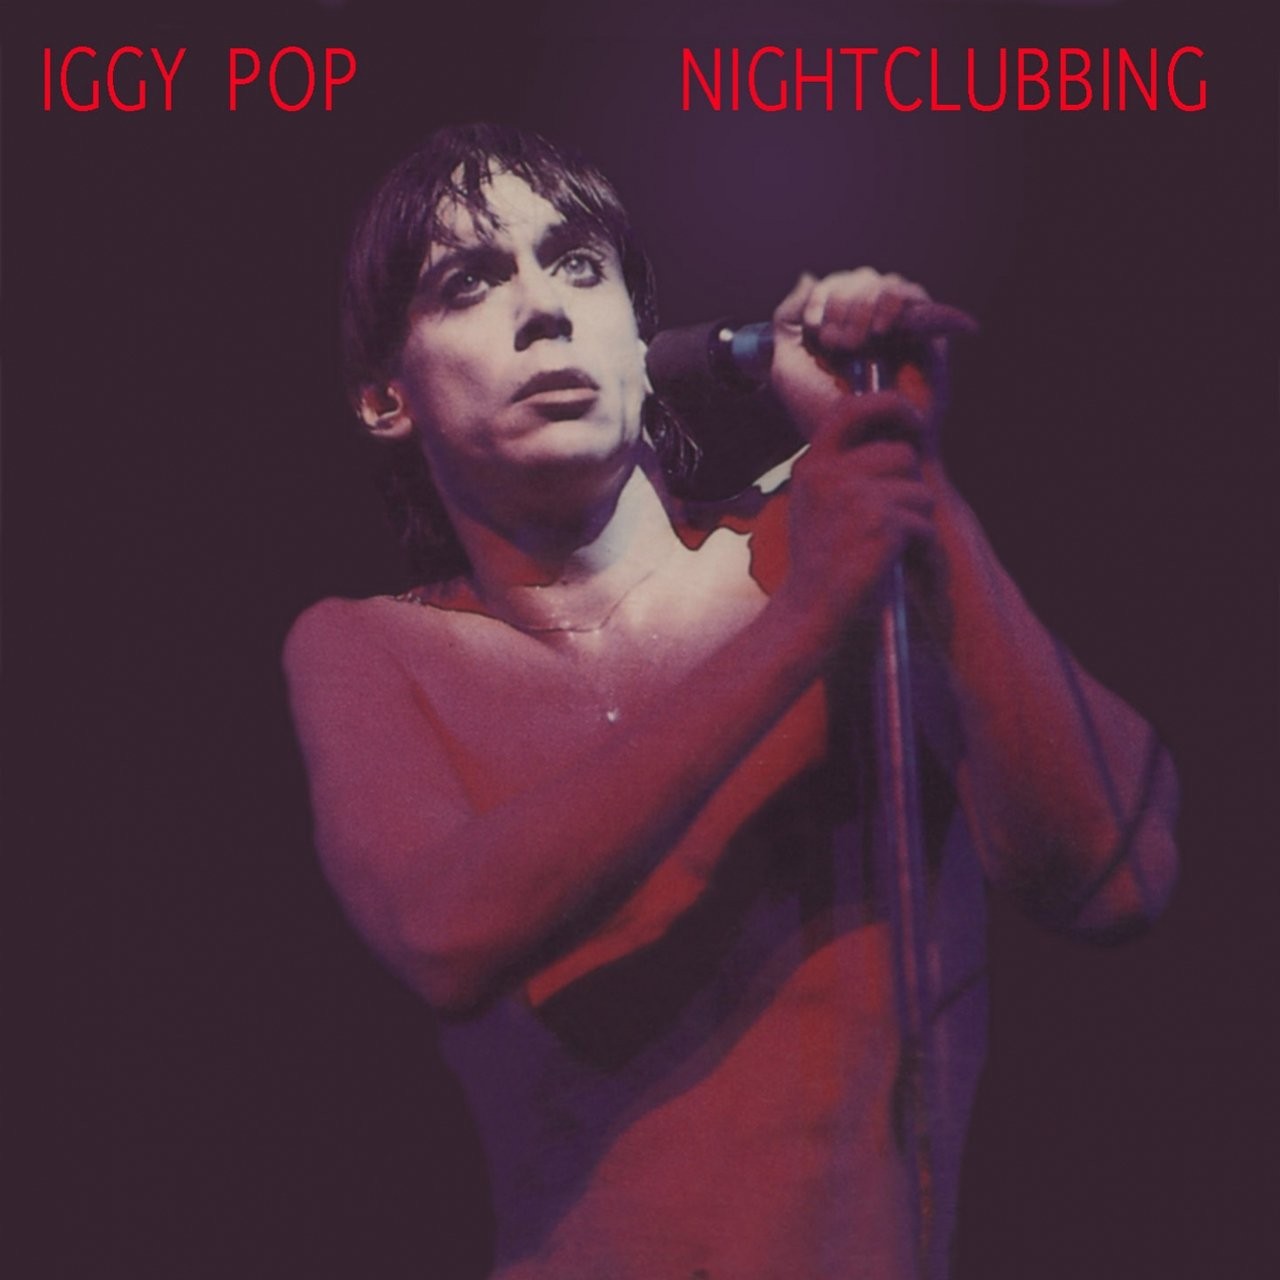 8. &#147;Nightclubbing&#148;
The soundtrack to everyone&#146;s decadent period in their early twenties, they pretty much have to knock this one out. Don&#146;t they?
(Photo: original cover art to the single for &#147;Nightclubbing.&#148;)